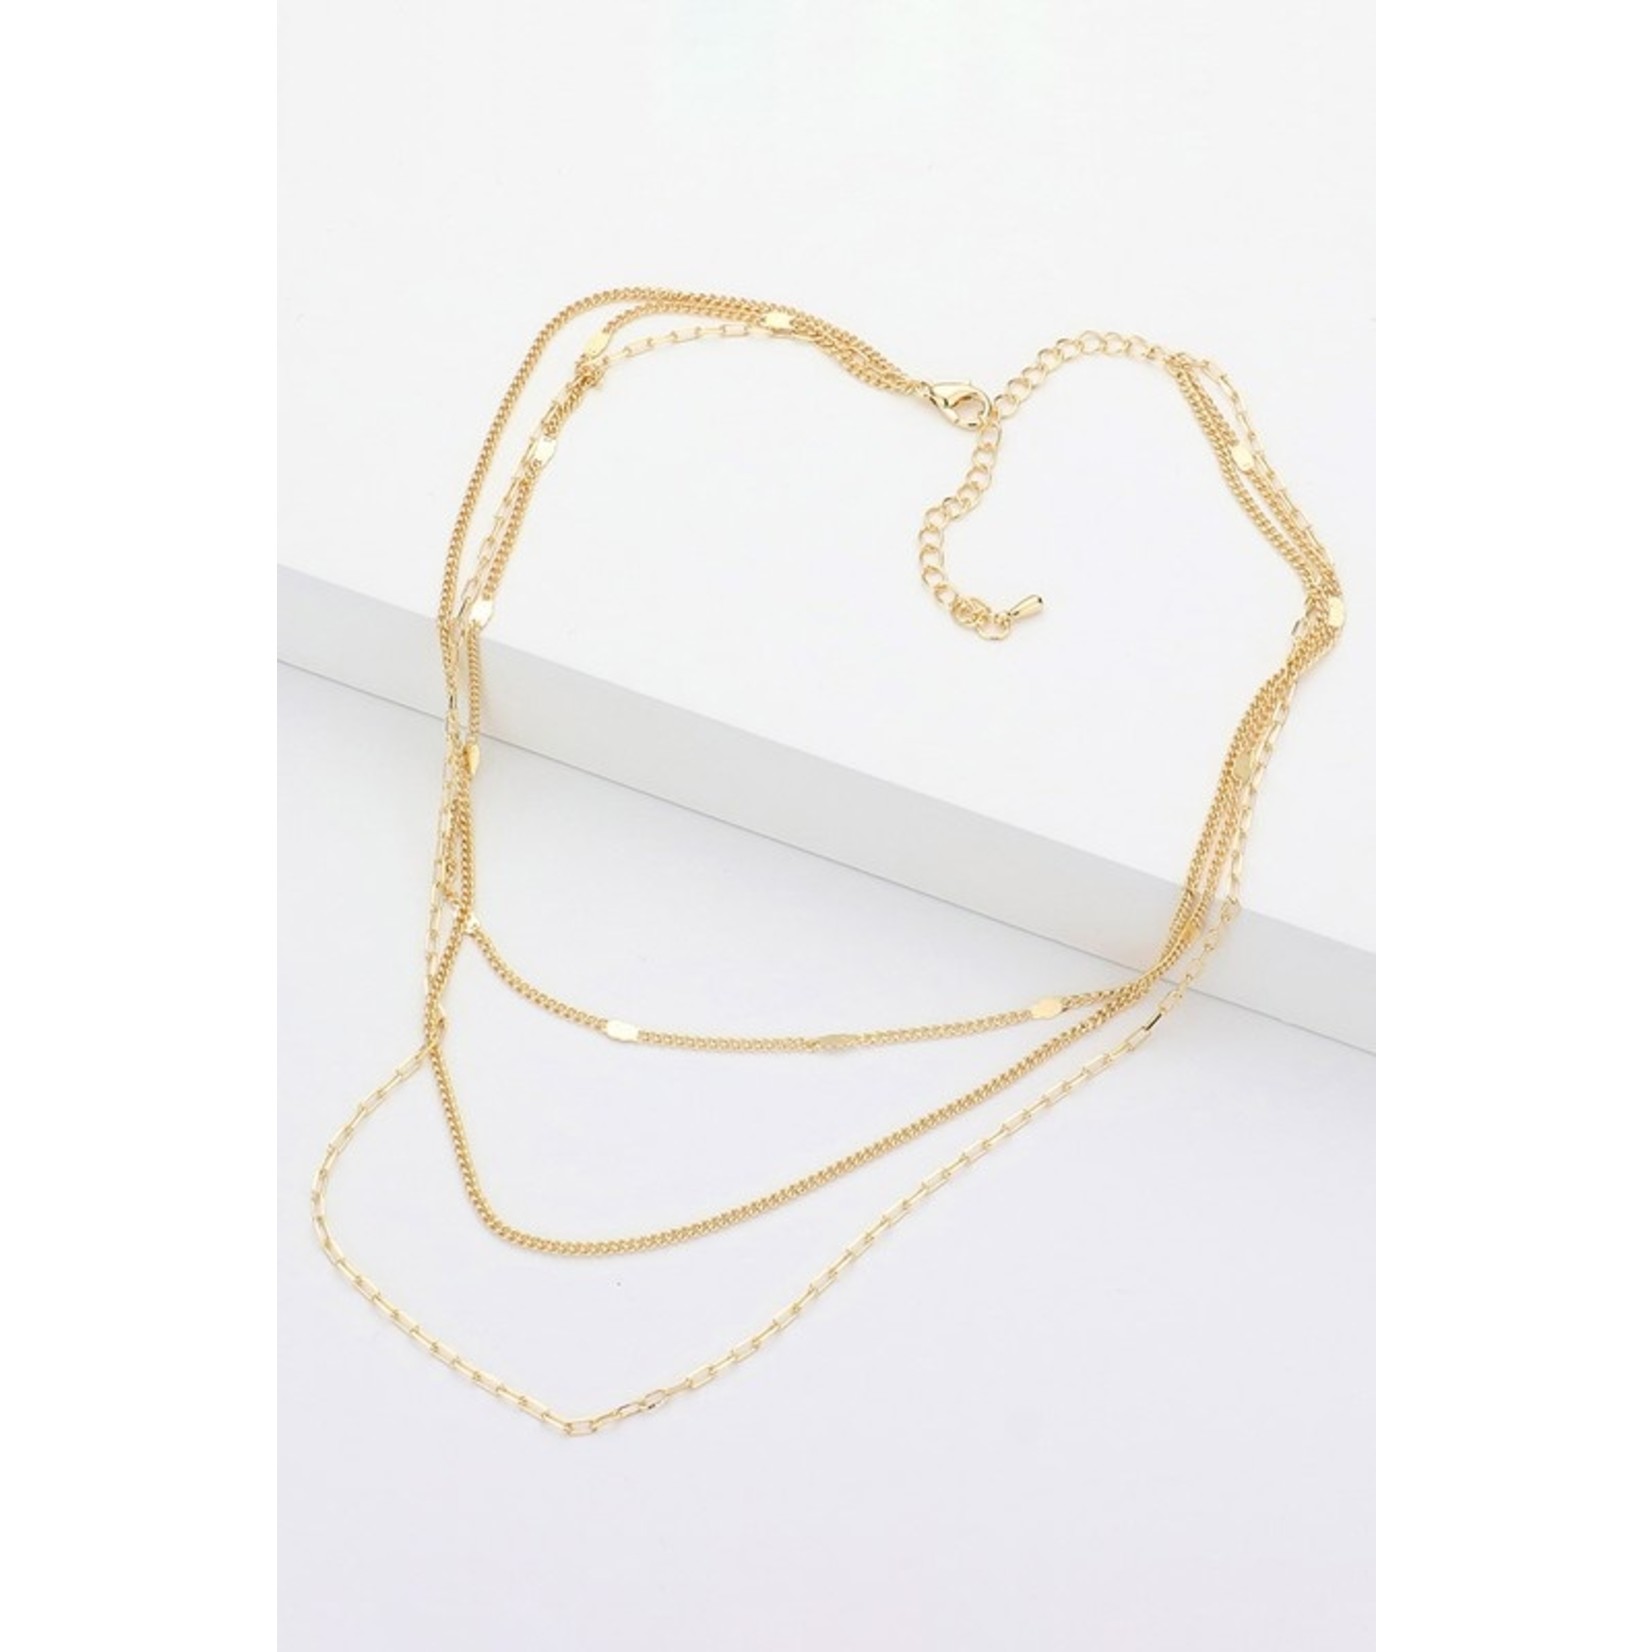 The Triple Layered Chain Necklace - Gold